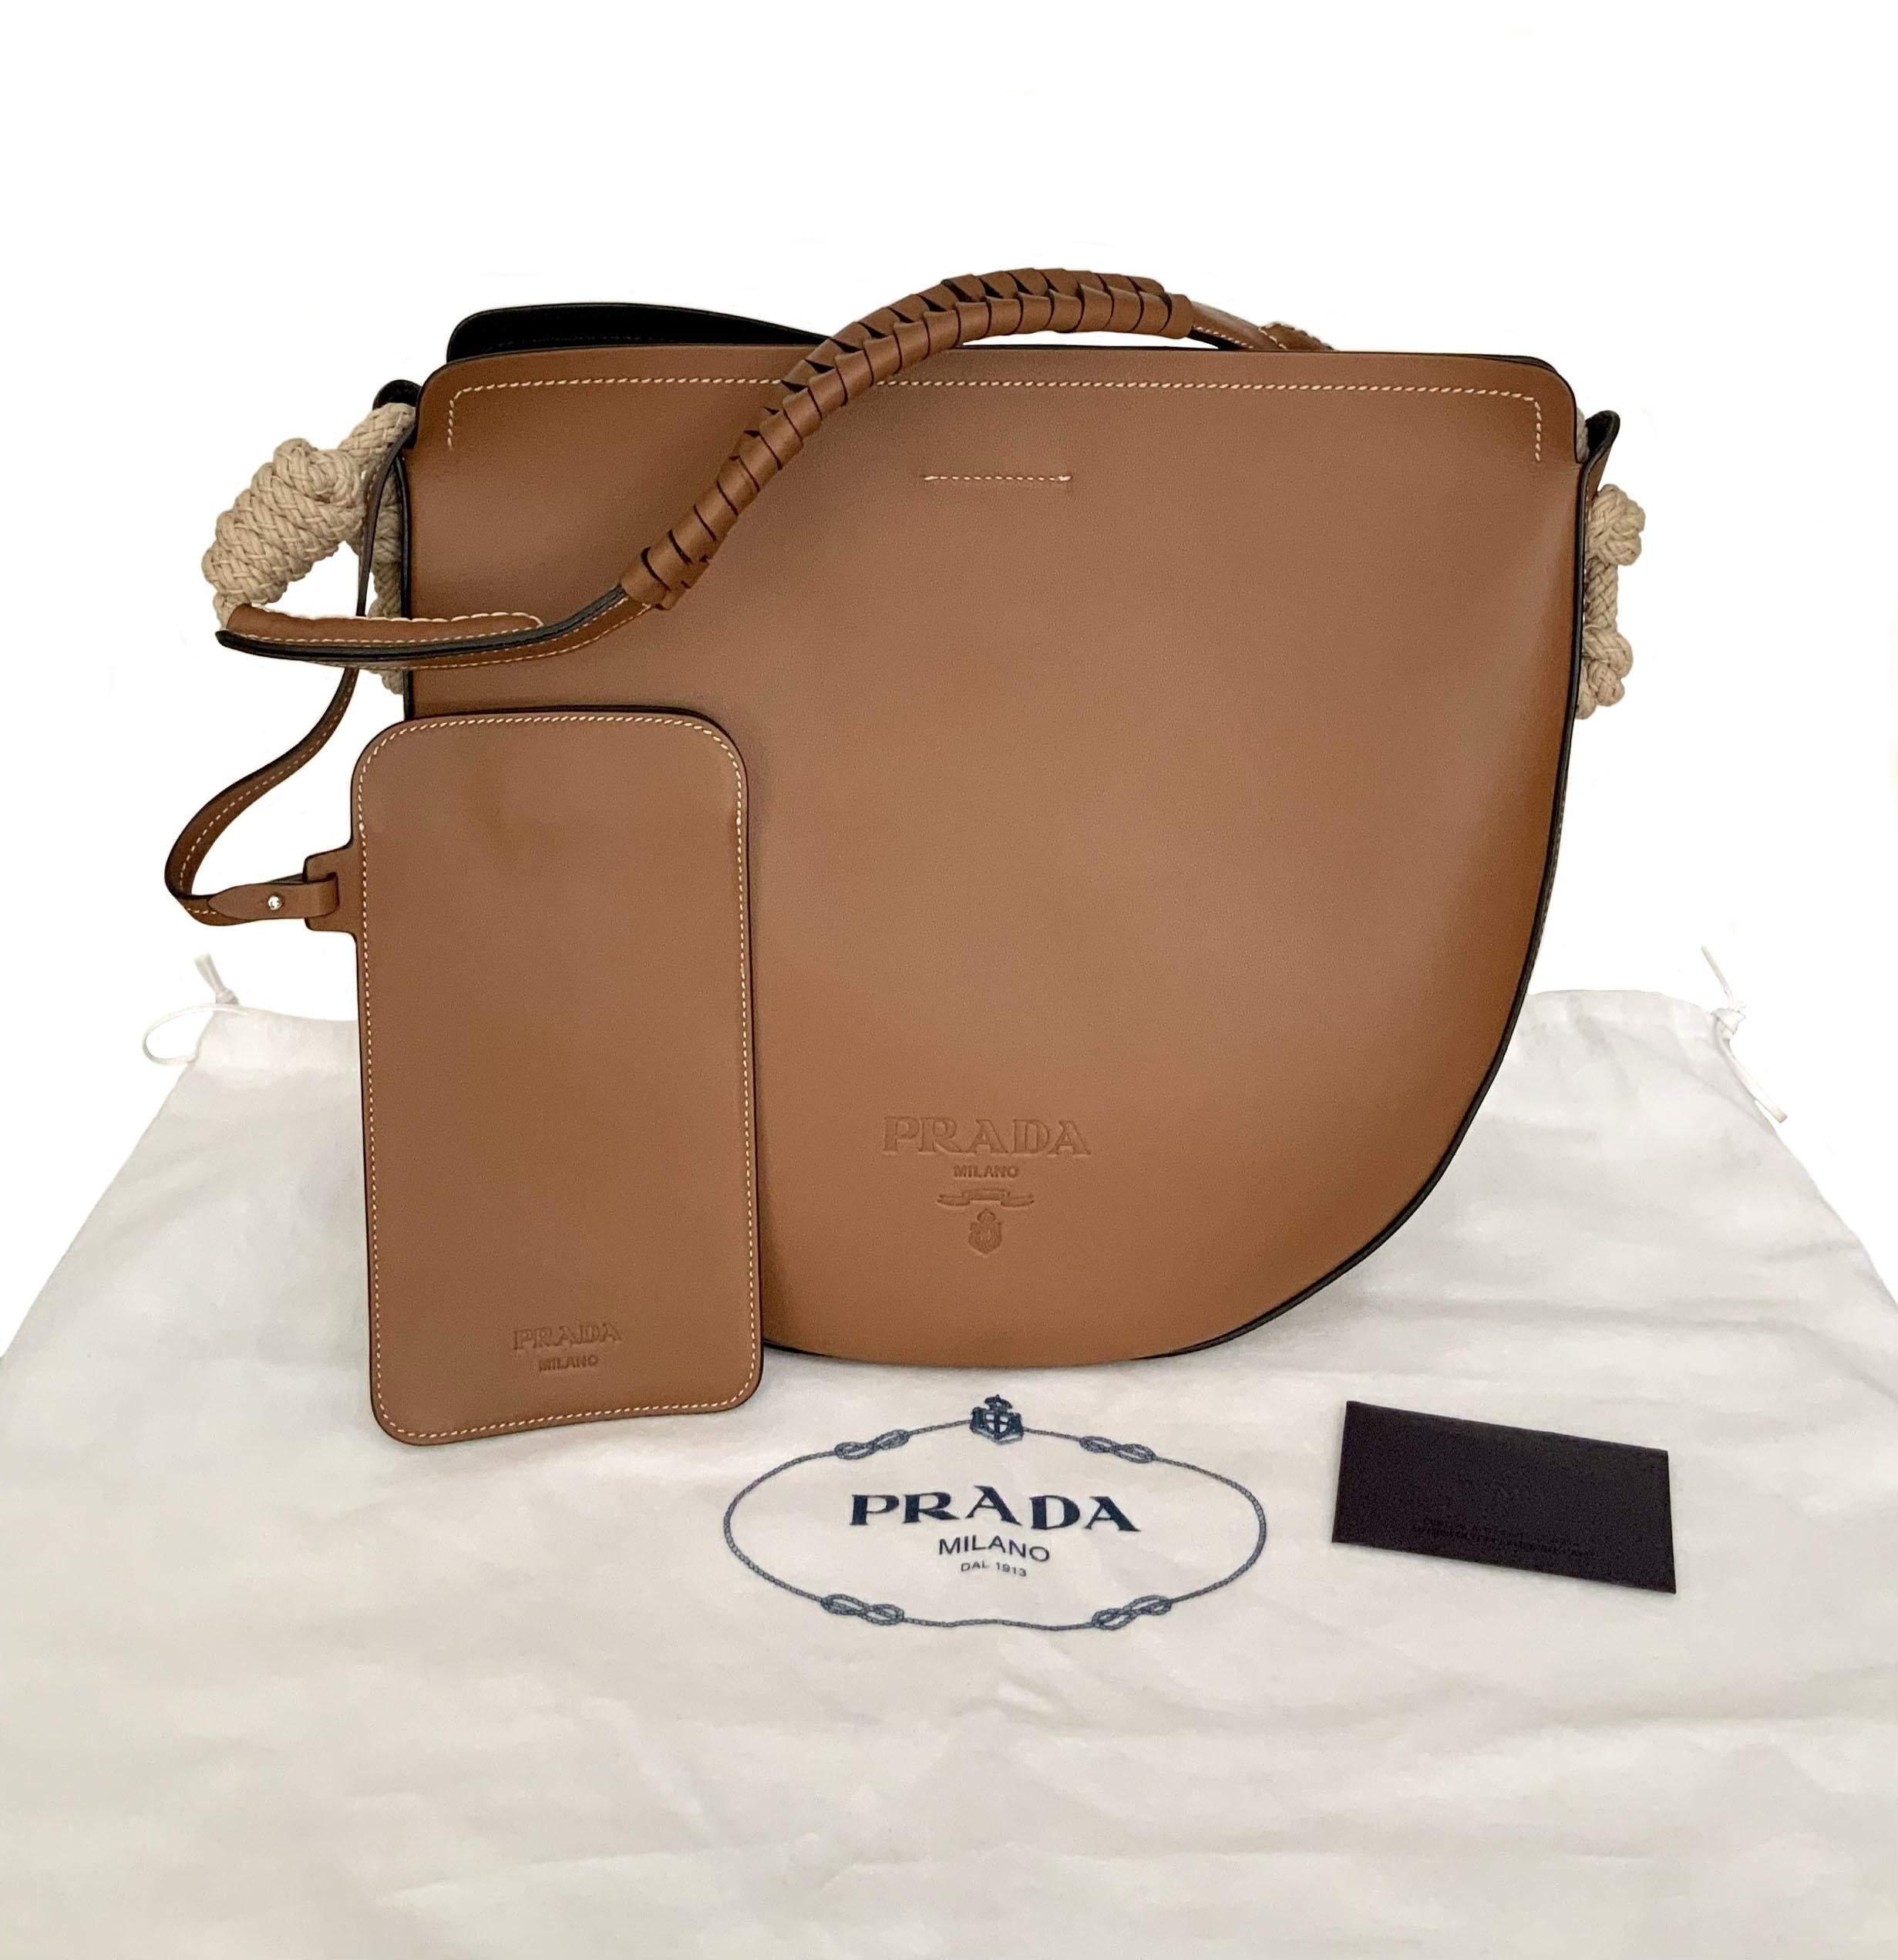 This pre-owned but new bag from the house of Prada is crafted in calfskin leather with contrasting cord details. 
It features a woven handle, the iconic hot-pressed logo on the front and a black Nappa leather interior.
A magnet closure and a